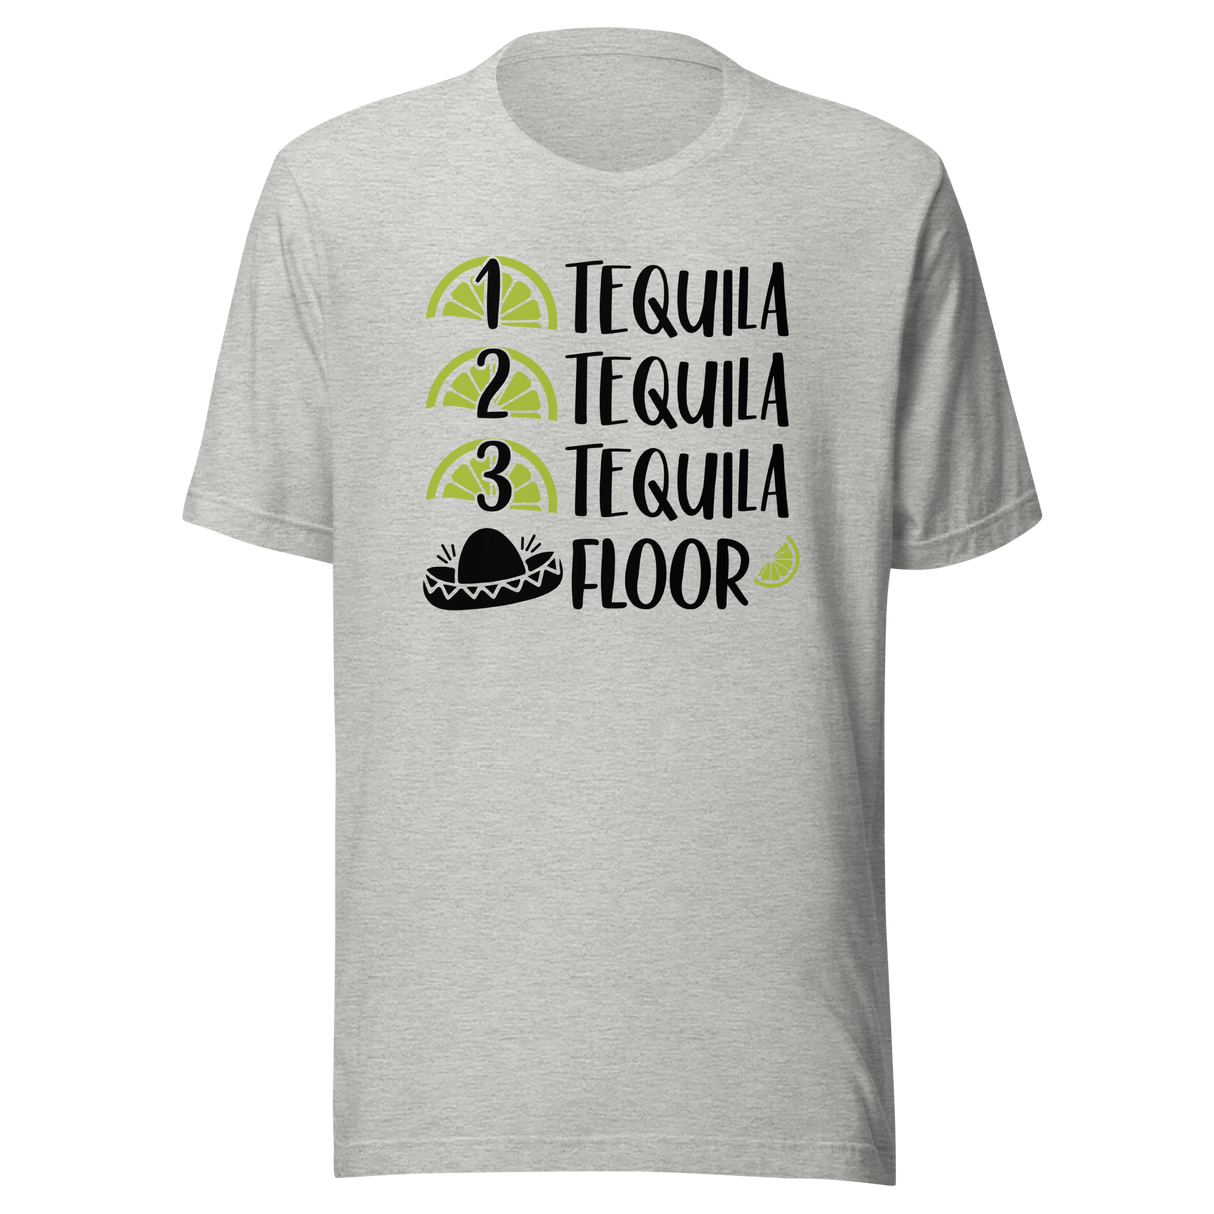 one-tequila-two-tequila-three-tequila-floor-food-tee-funny-t-shirt-tequila-tee-humor-t-shirt-quirky-tee#color_athletic-heather